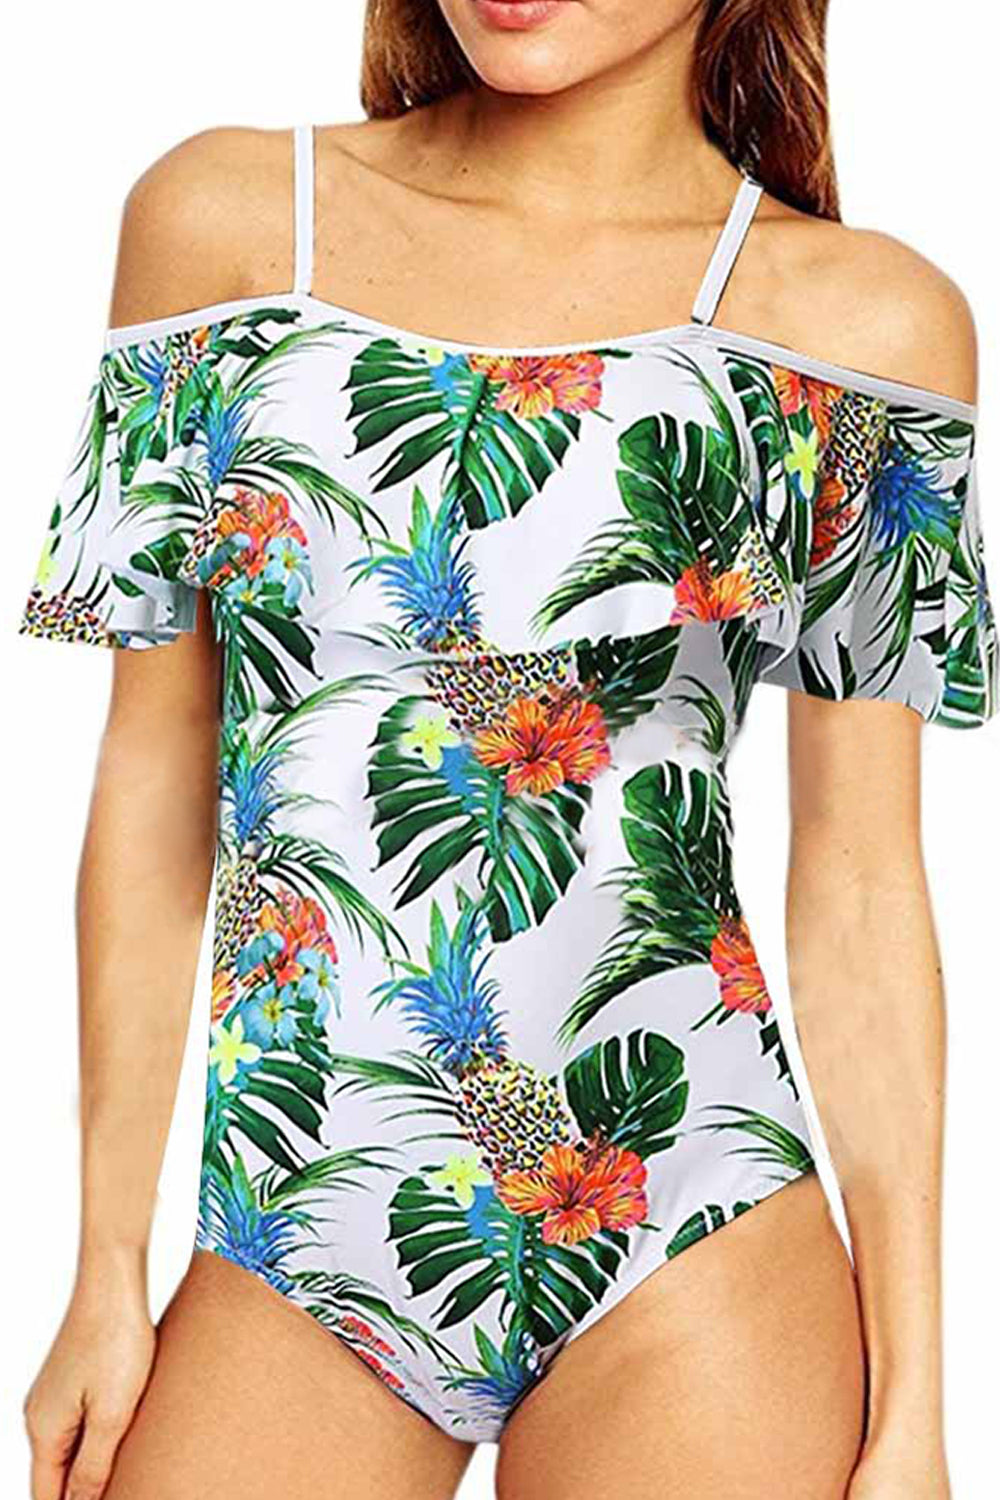 Iyasson Tropical Pineapple Printing Off shoulder One-piece Swimsuit